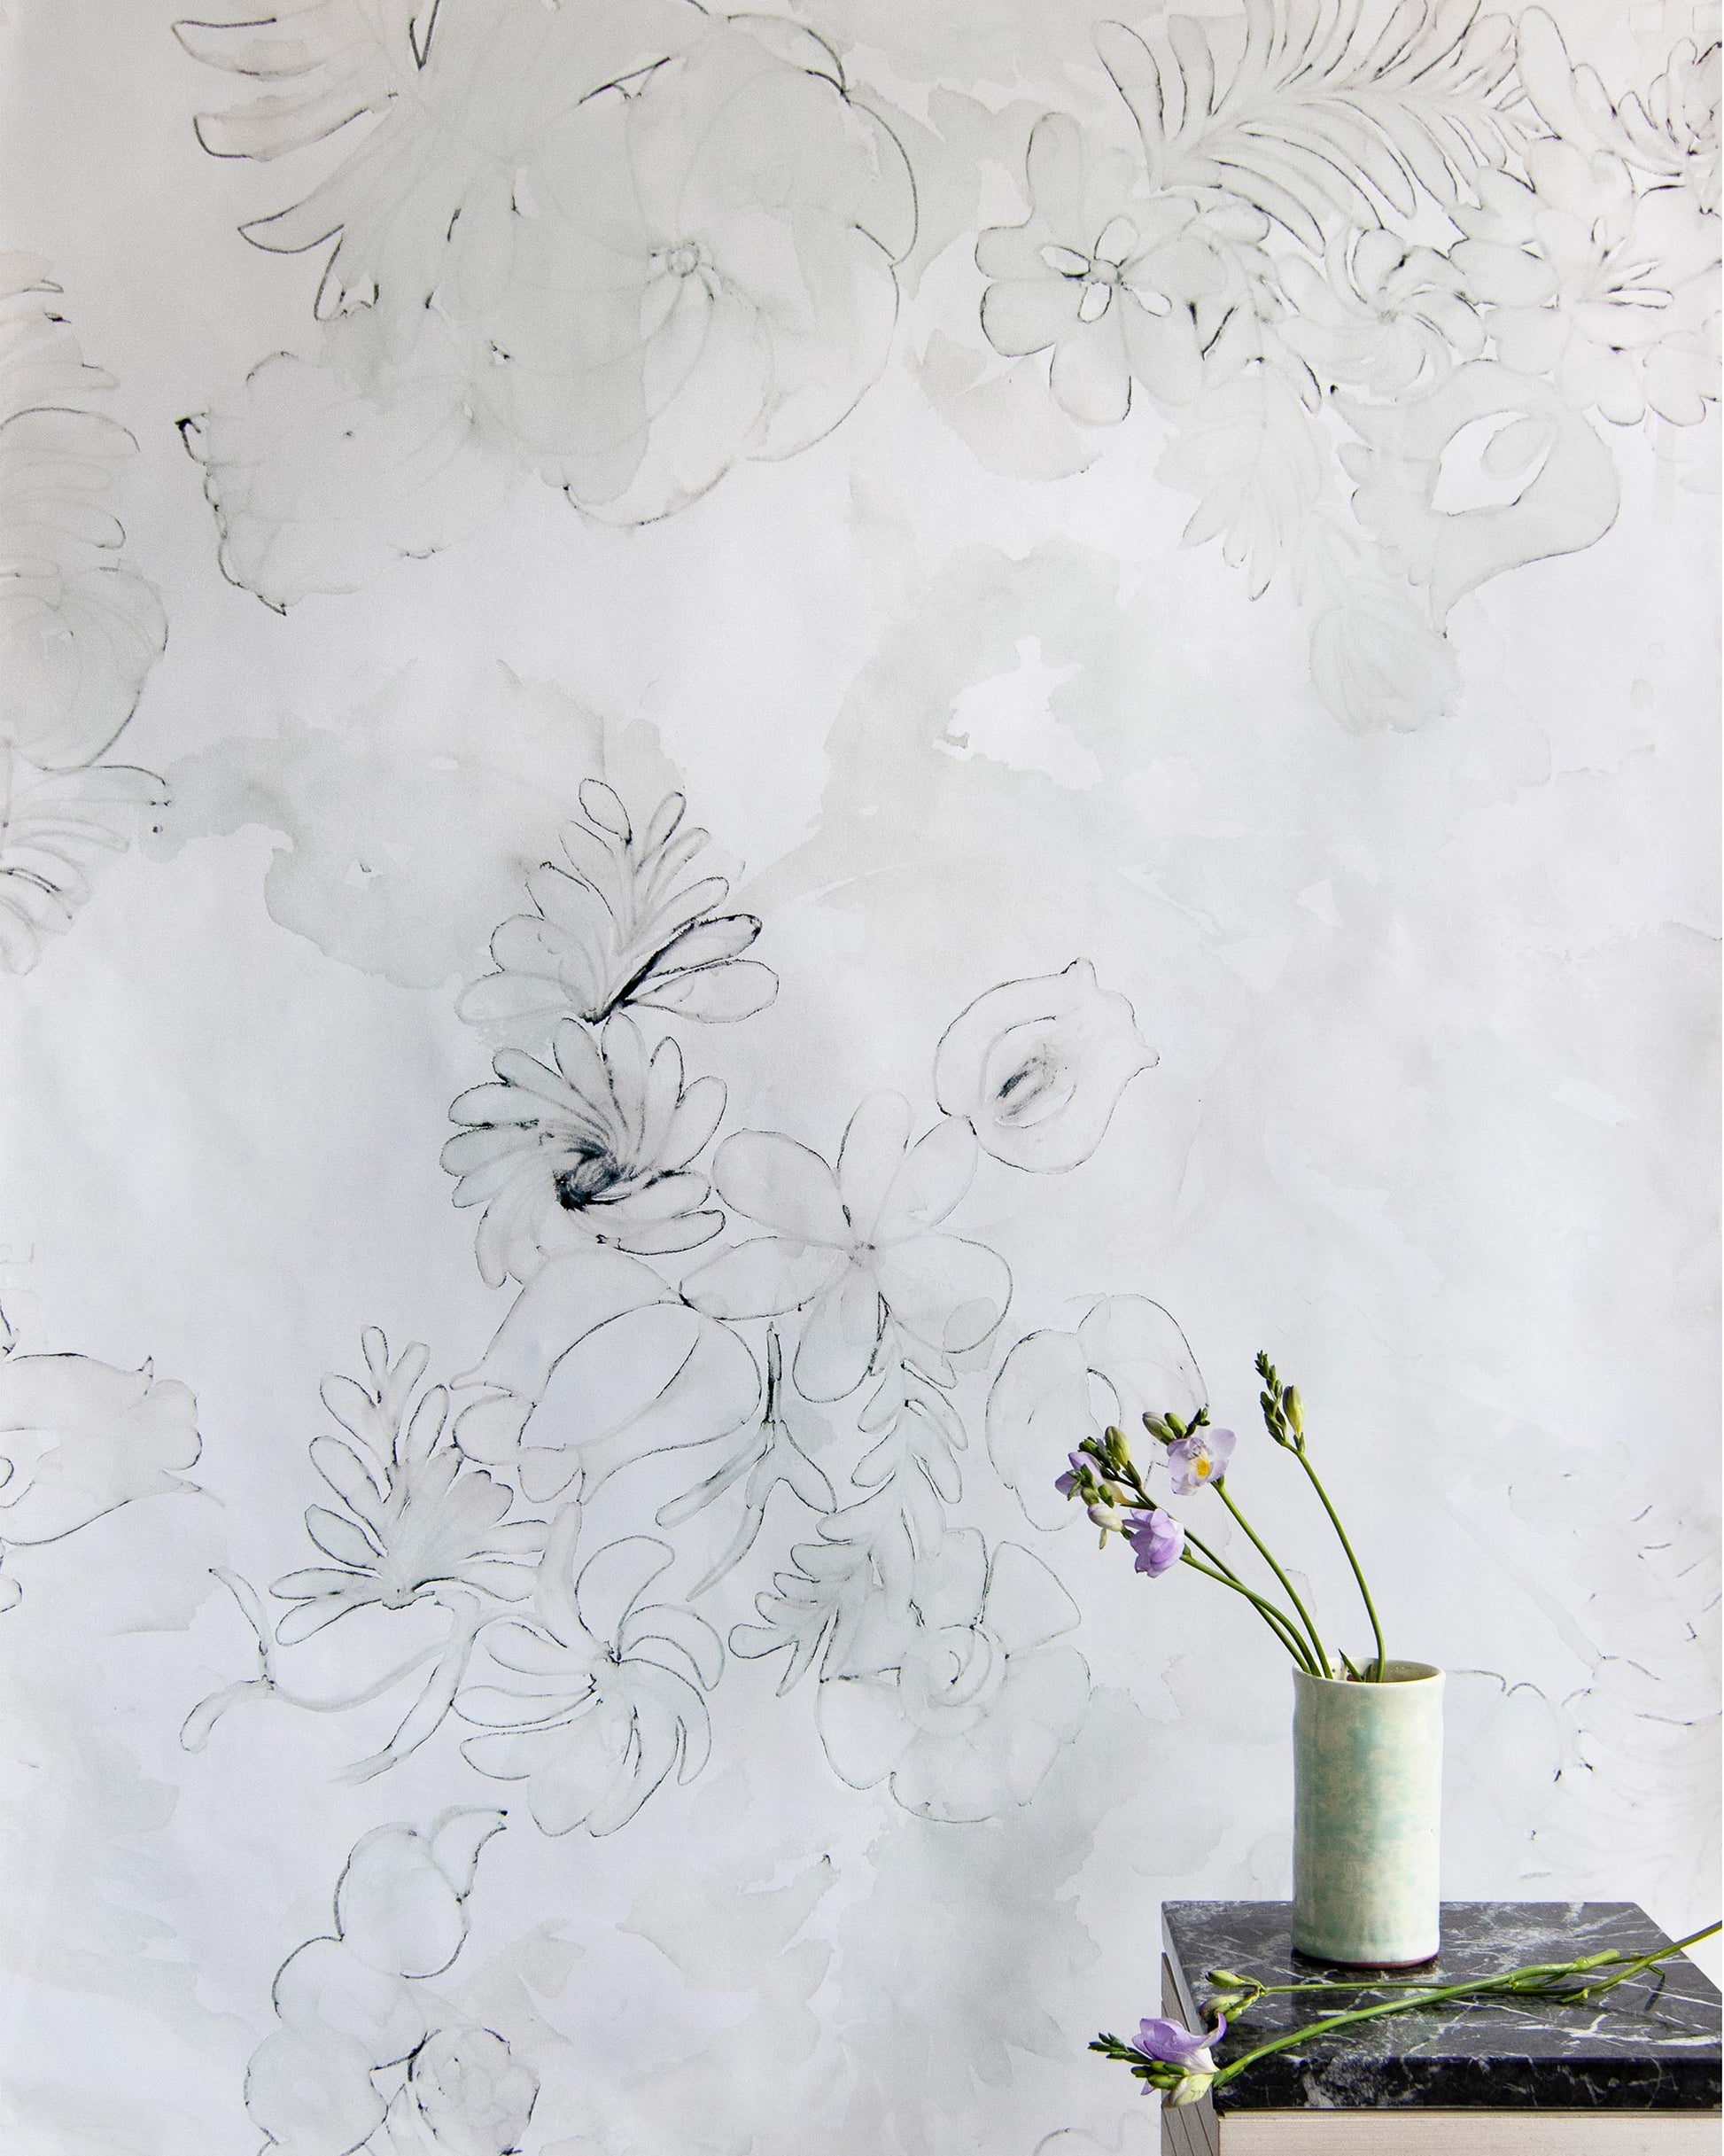 A vase of Belize Blooms Wallpaper sits on a table in front of a wall